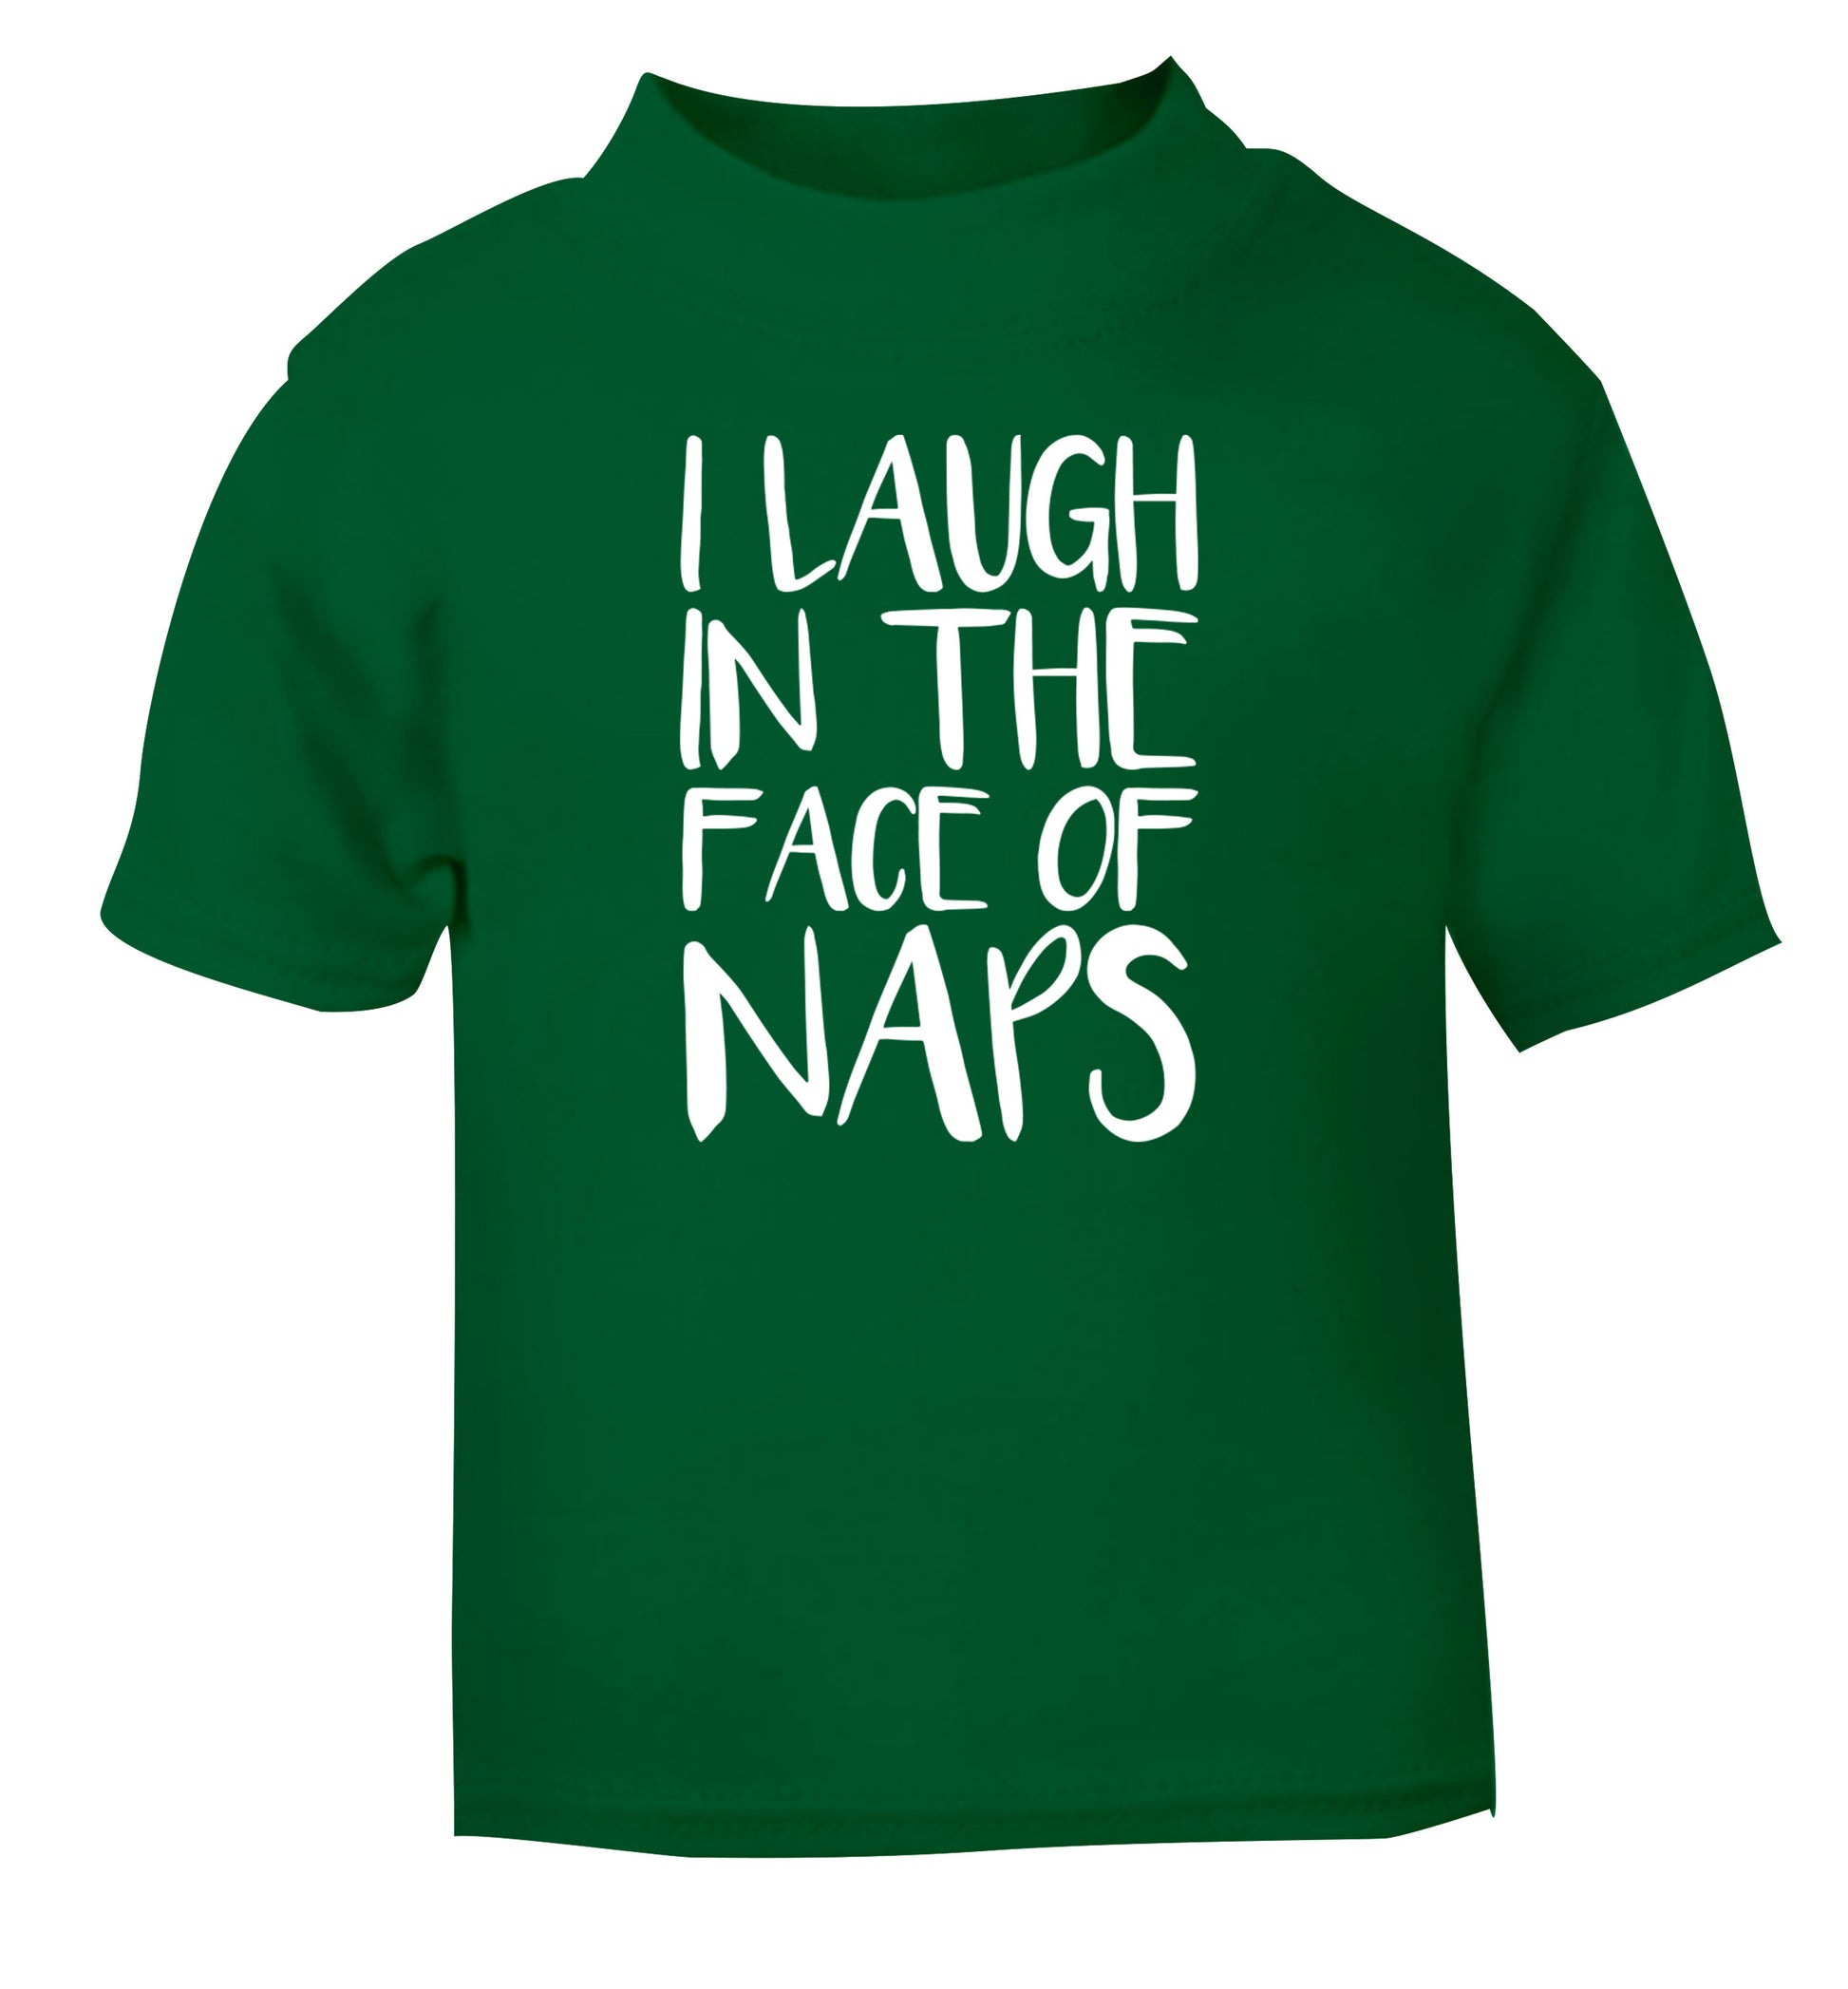 I laugh in the face of naps green Baby Toddler Tshirt 2 Years